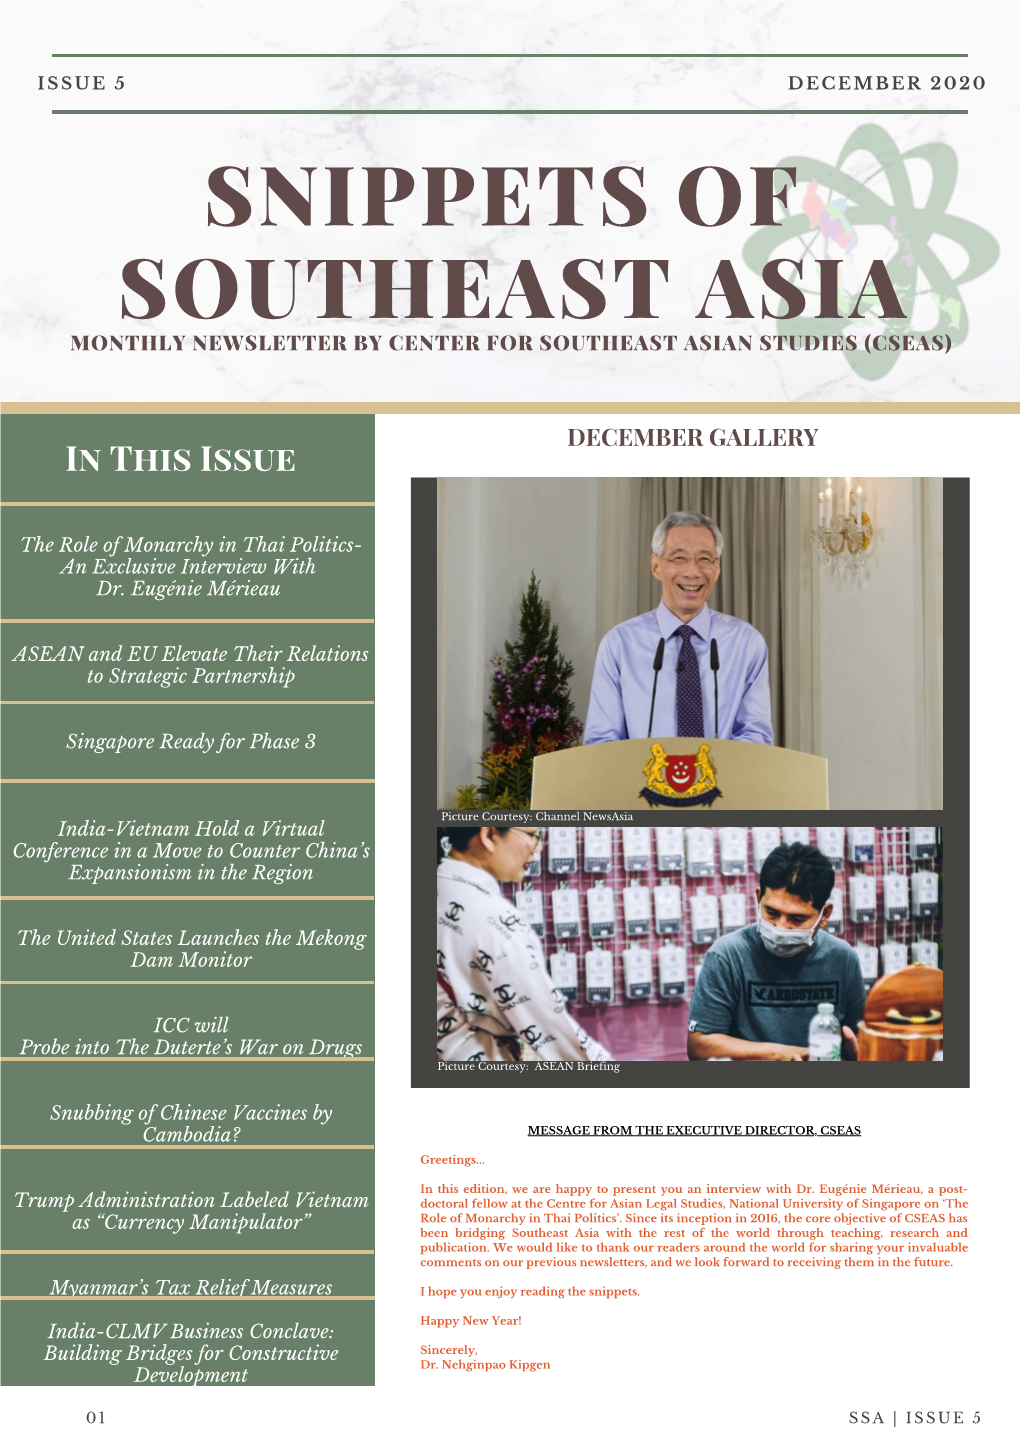 Snippets of Southeast Asia, Issue 5, December 2020